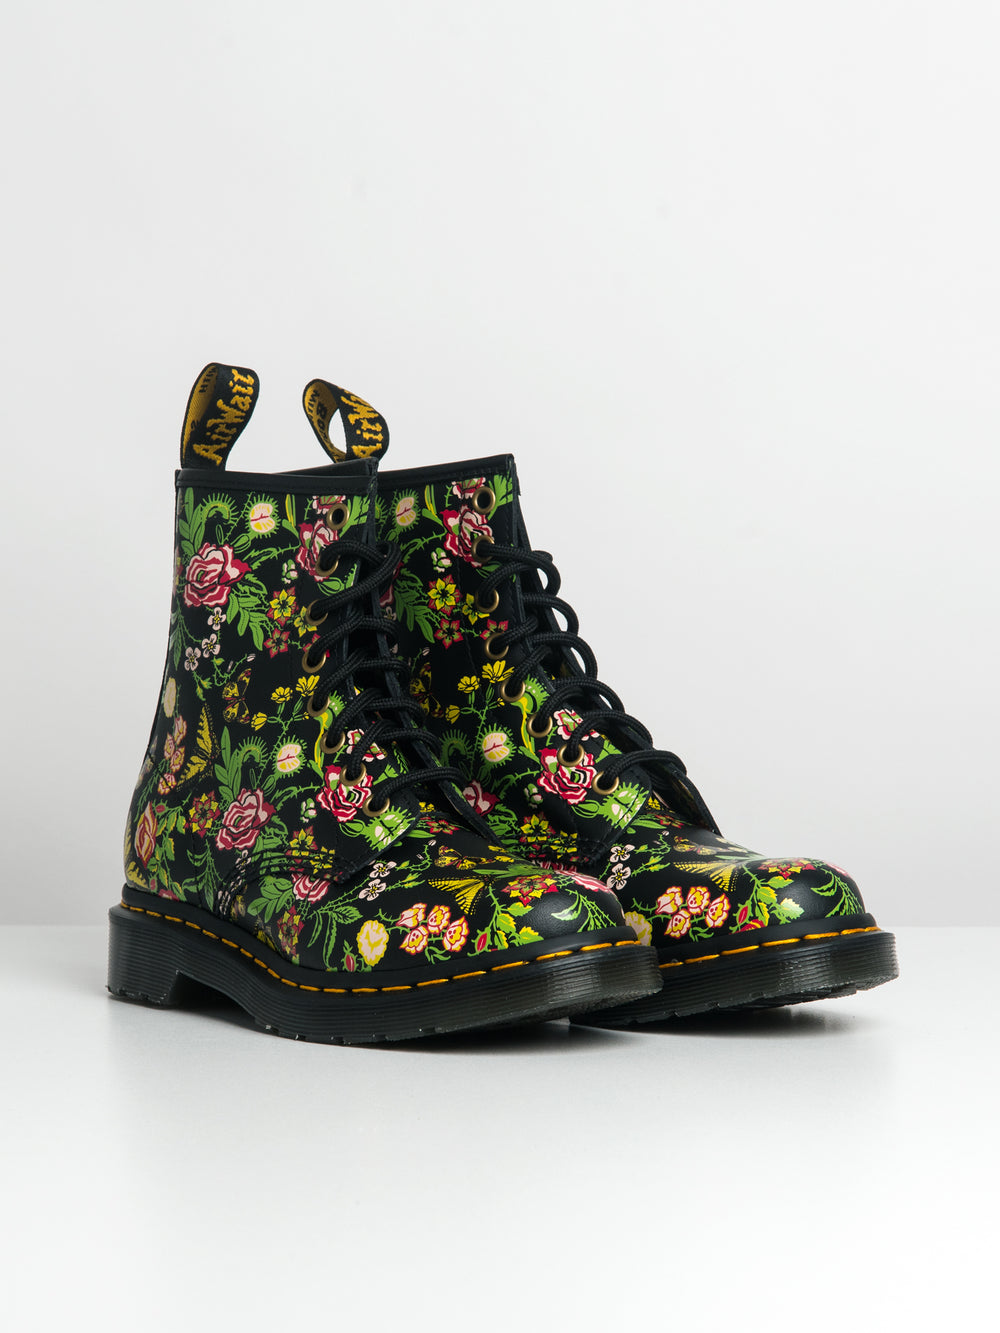 WOMENS DR MARTENS 1460 BLOOM MID CALF BOOTS - CLEARANCE